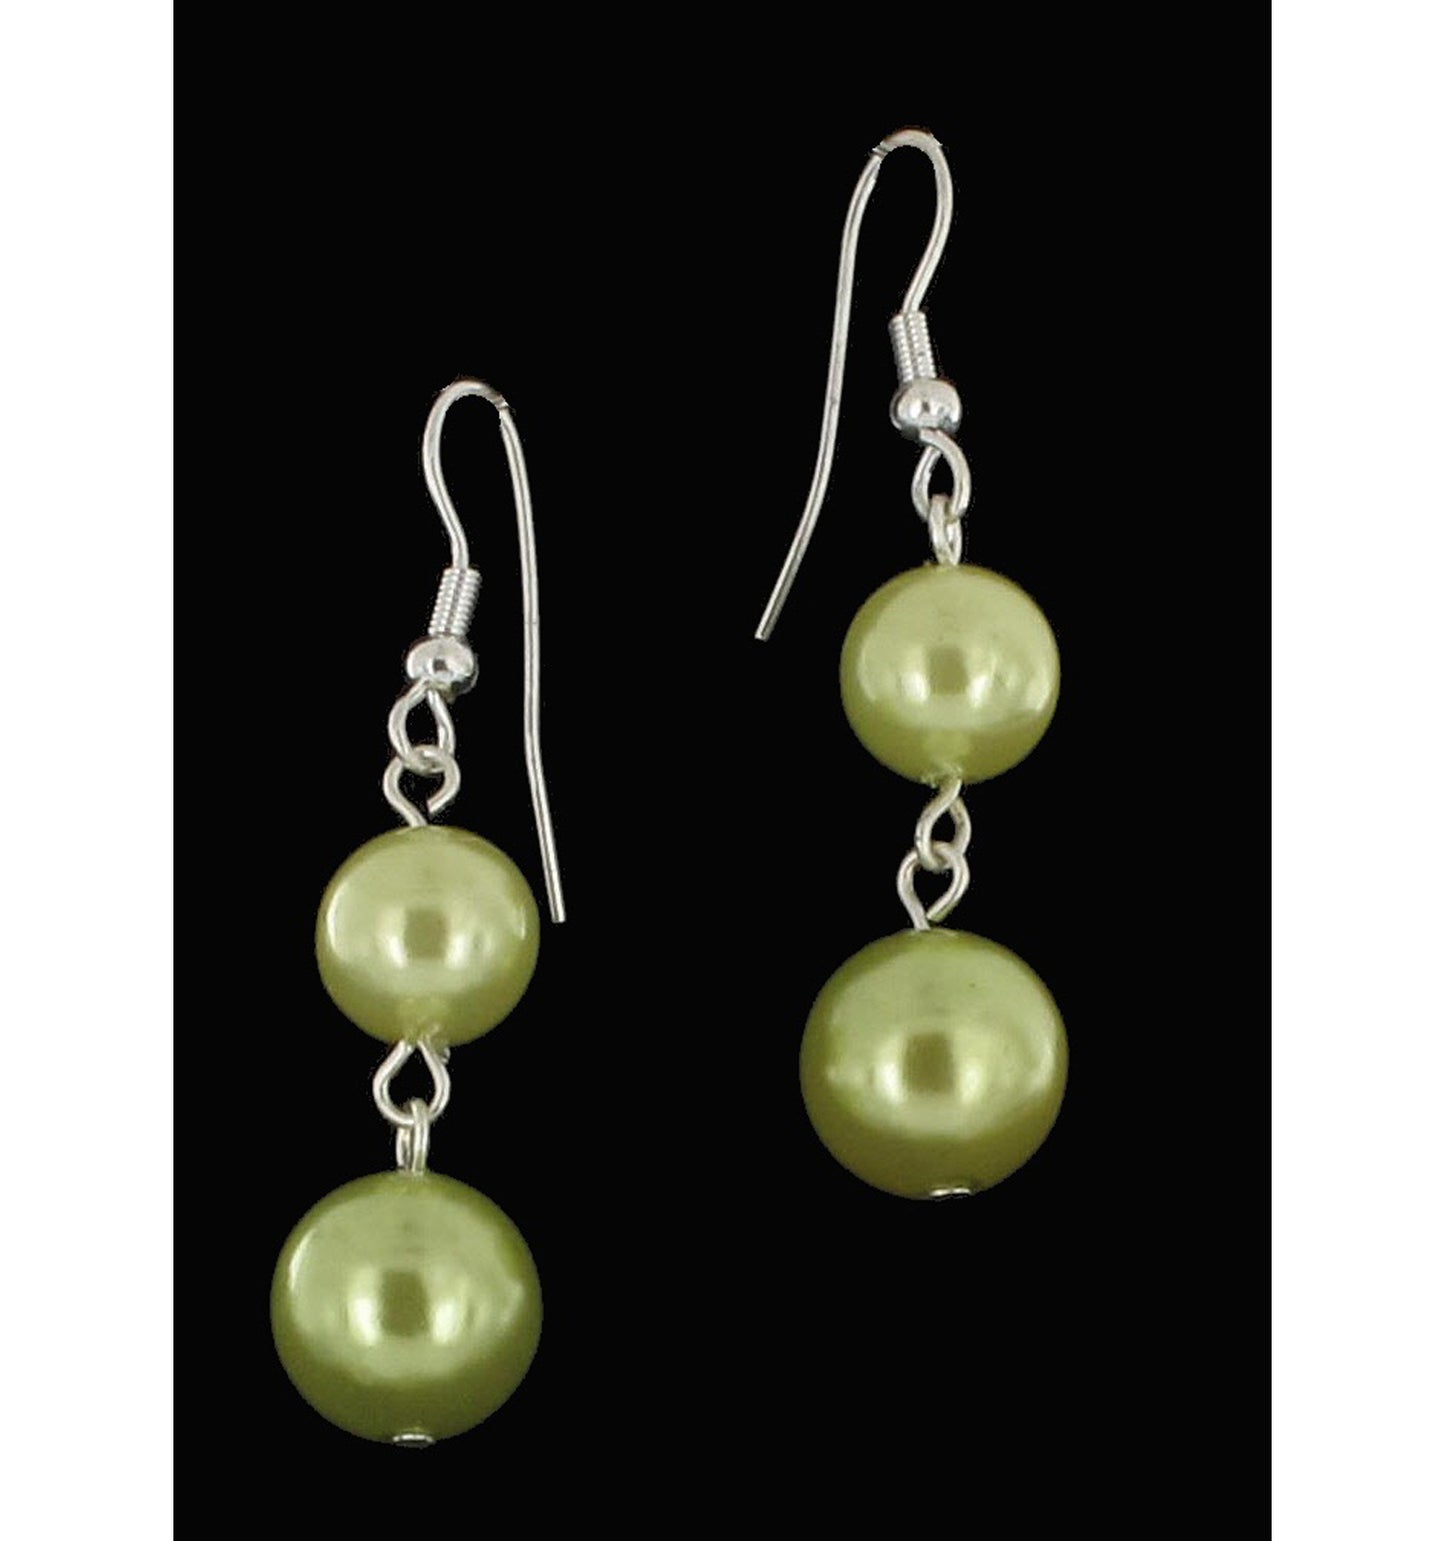 Pierced Earrings 2" + Silver Tone Layered Green Faux Pearl Necklace Set 19-20"